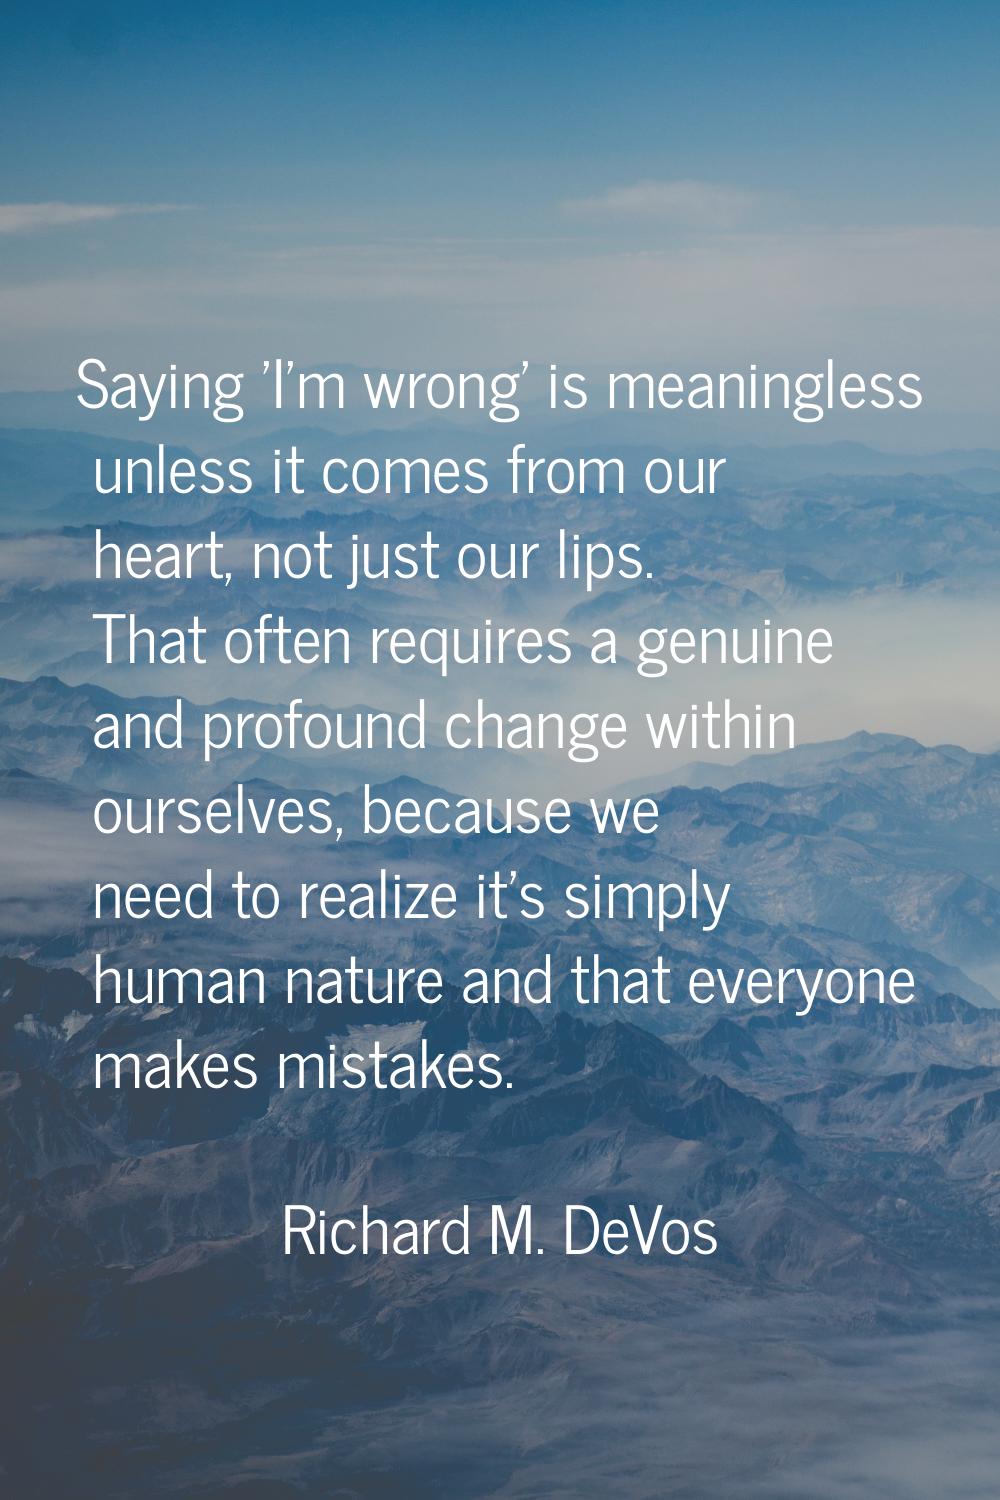 Saying 'I'm wrong' is meaningless unless it comes from our heart, not just our lips. That often req